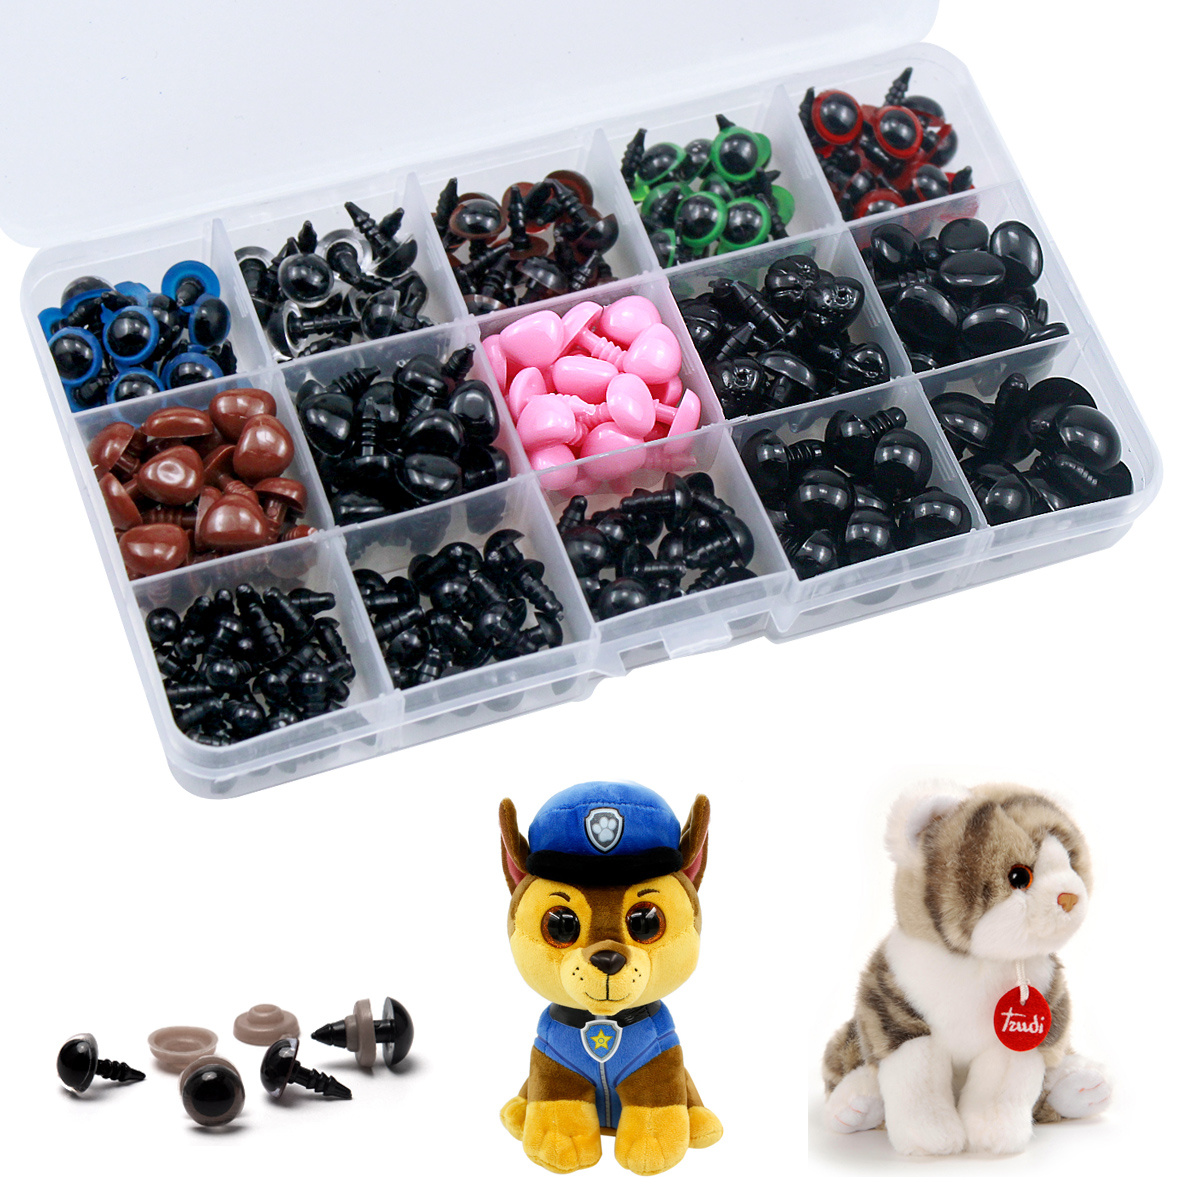 Safety Eyes And Noses, 560pcs Included Colourful Craft Doll Eyes